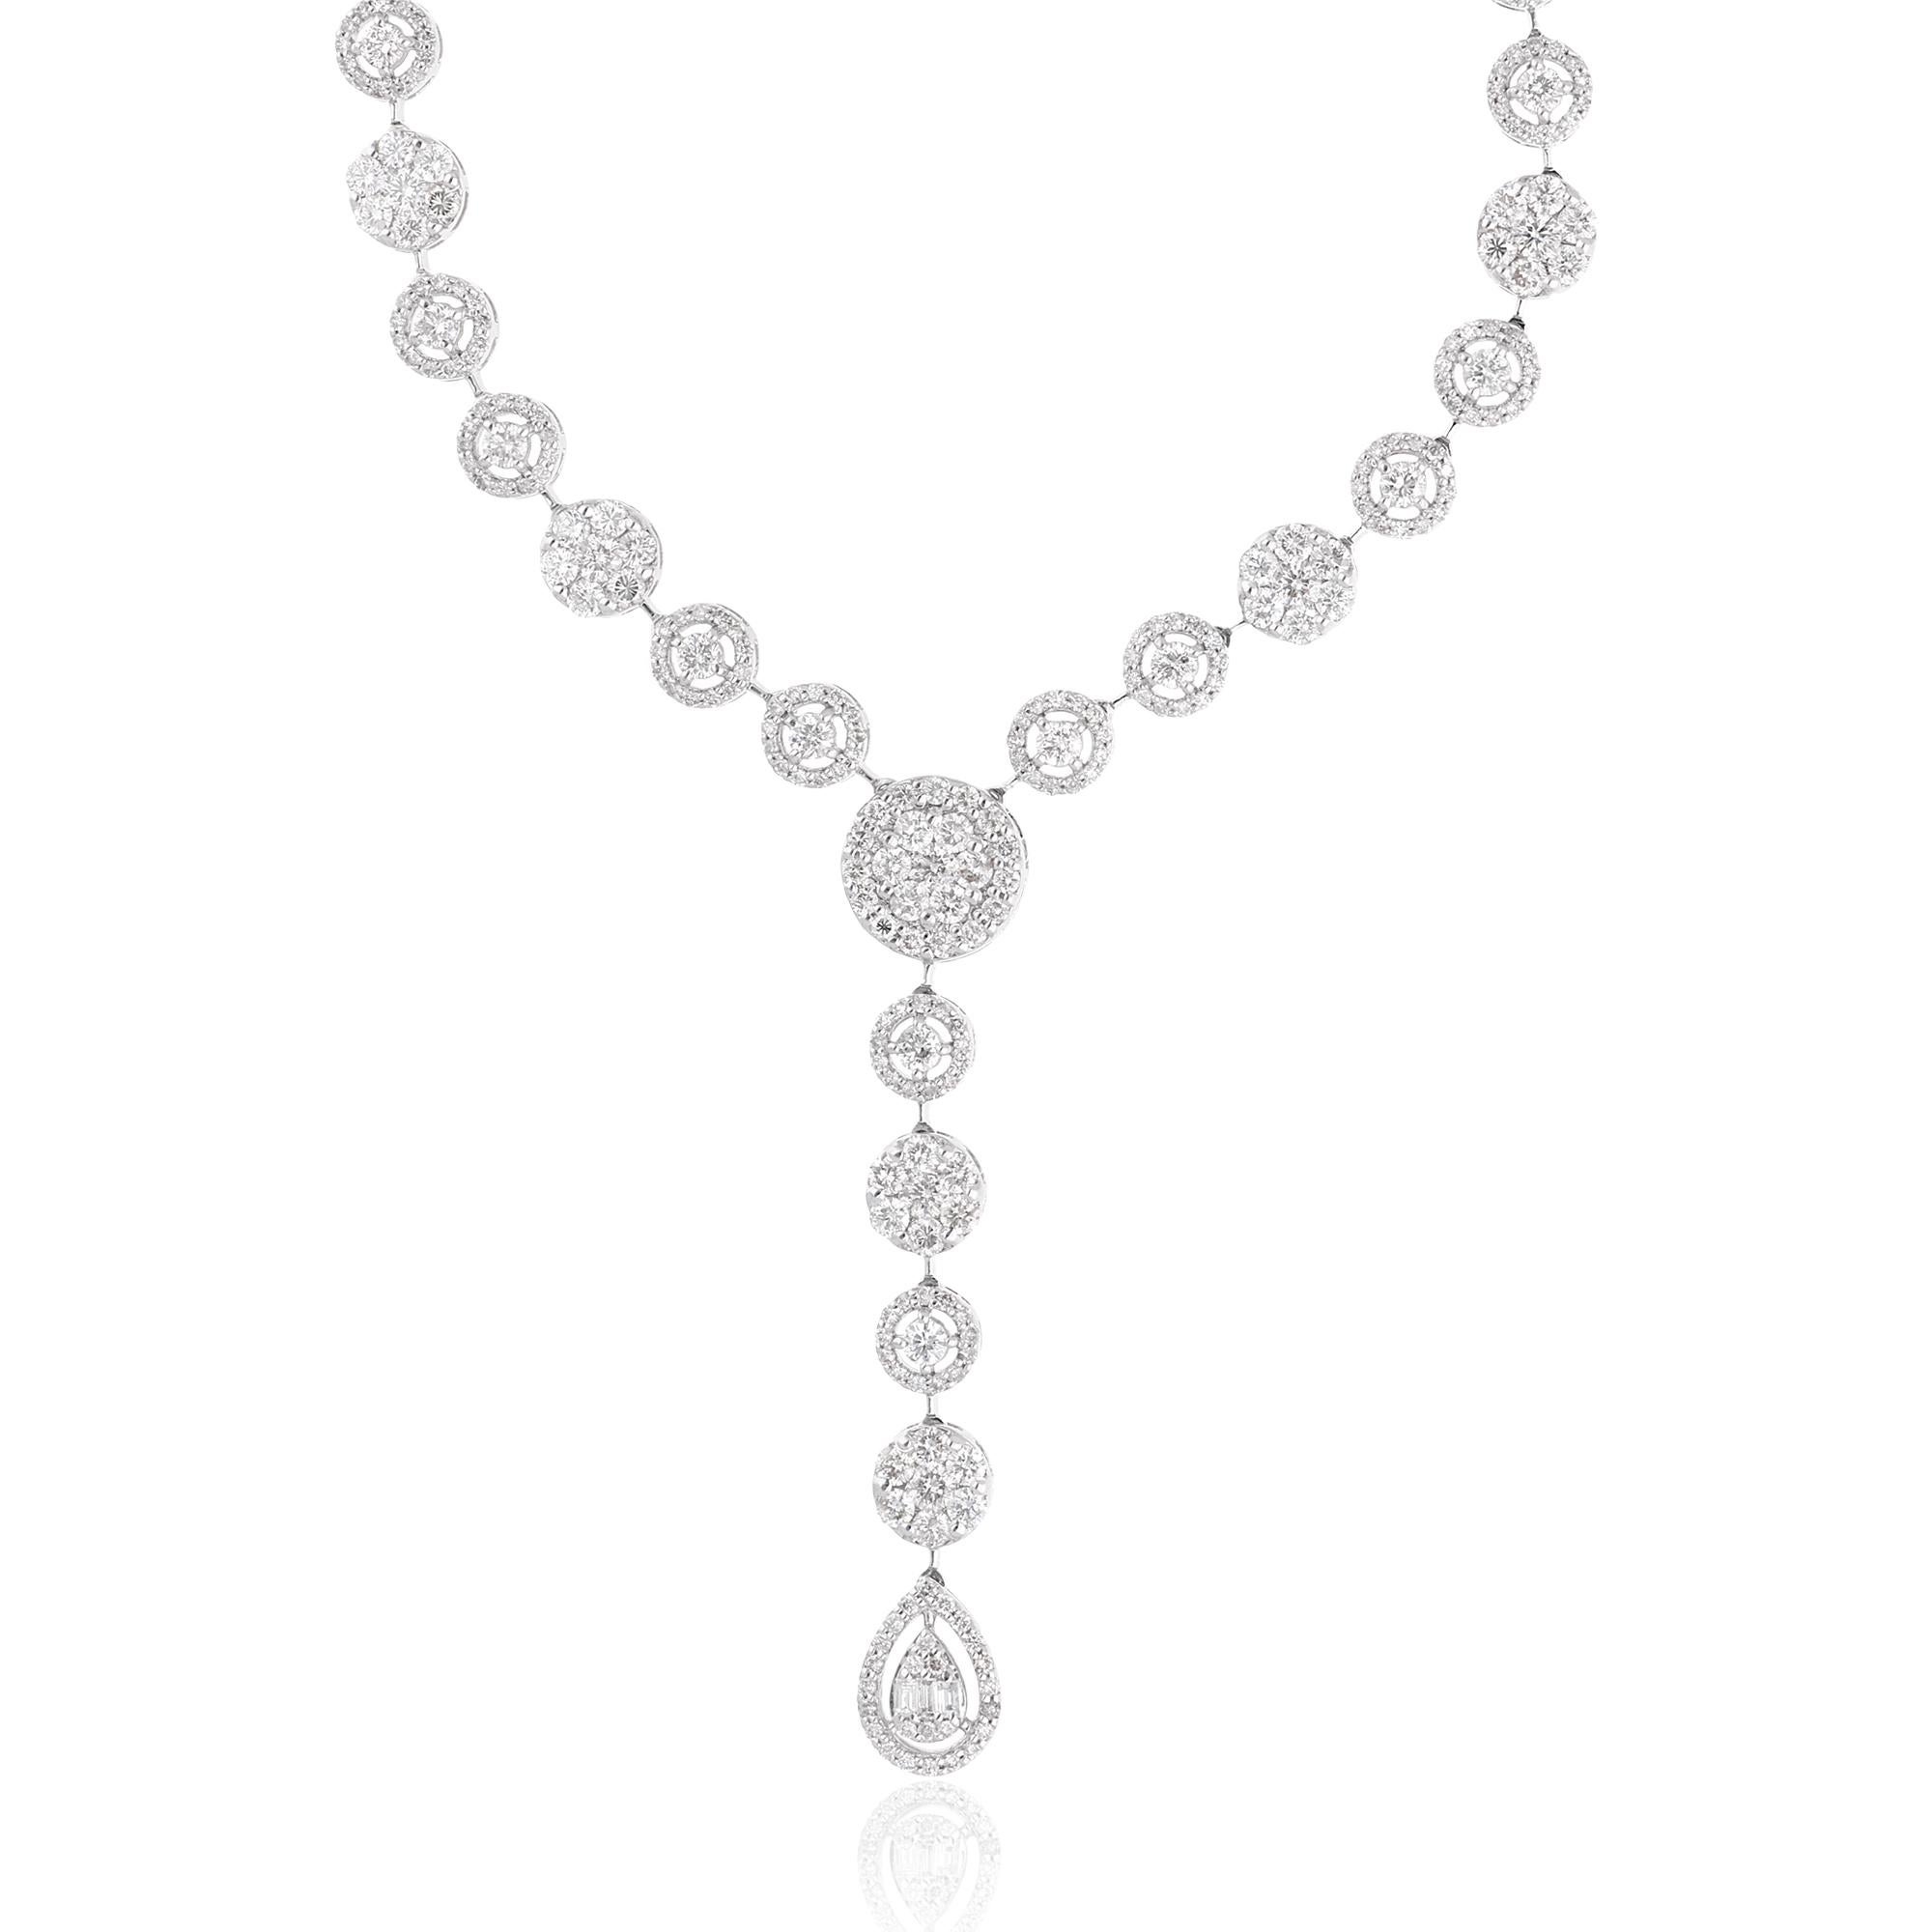 Introducing our stunning 7-carat SI clarity, HI color diamond lariat necklace crafted in 18-karat white gold. This exquisite piece of jewelry is a true embodiment of elegance and luxury.
The necklace features a lariat-style design, showcasing a